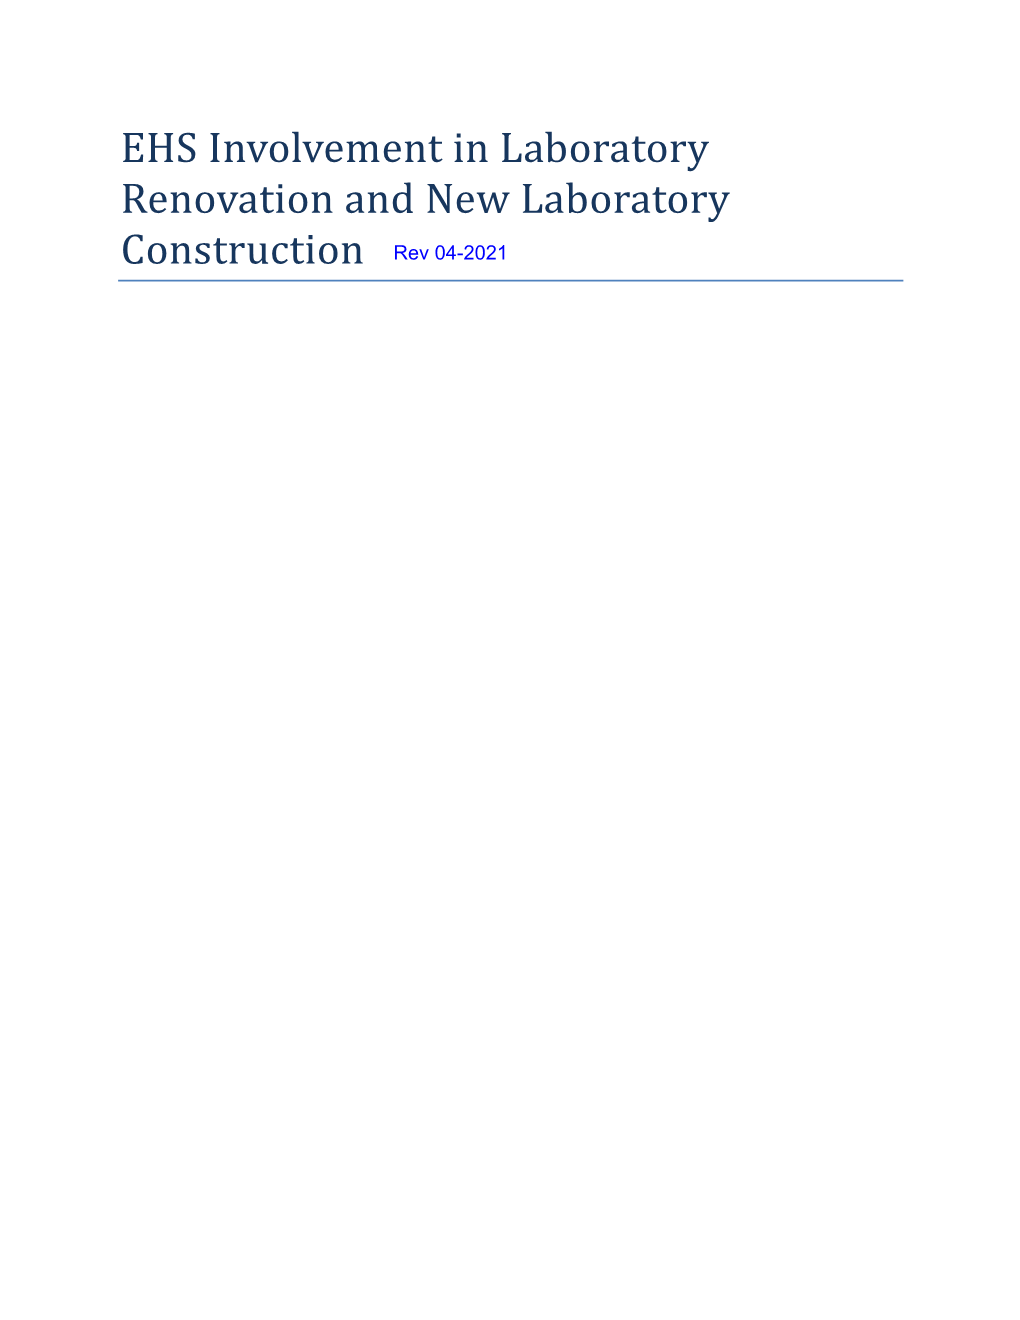 EHS Involvement in Laboratory Renovation and New Laboratory Construction Rev 04-2021